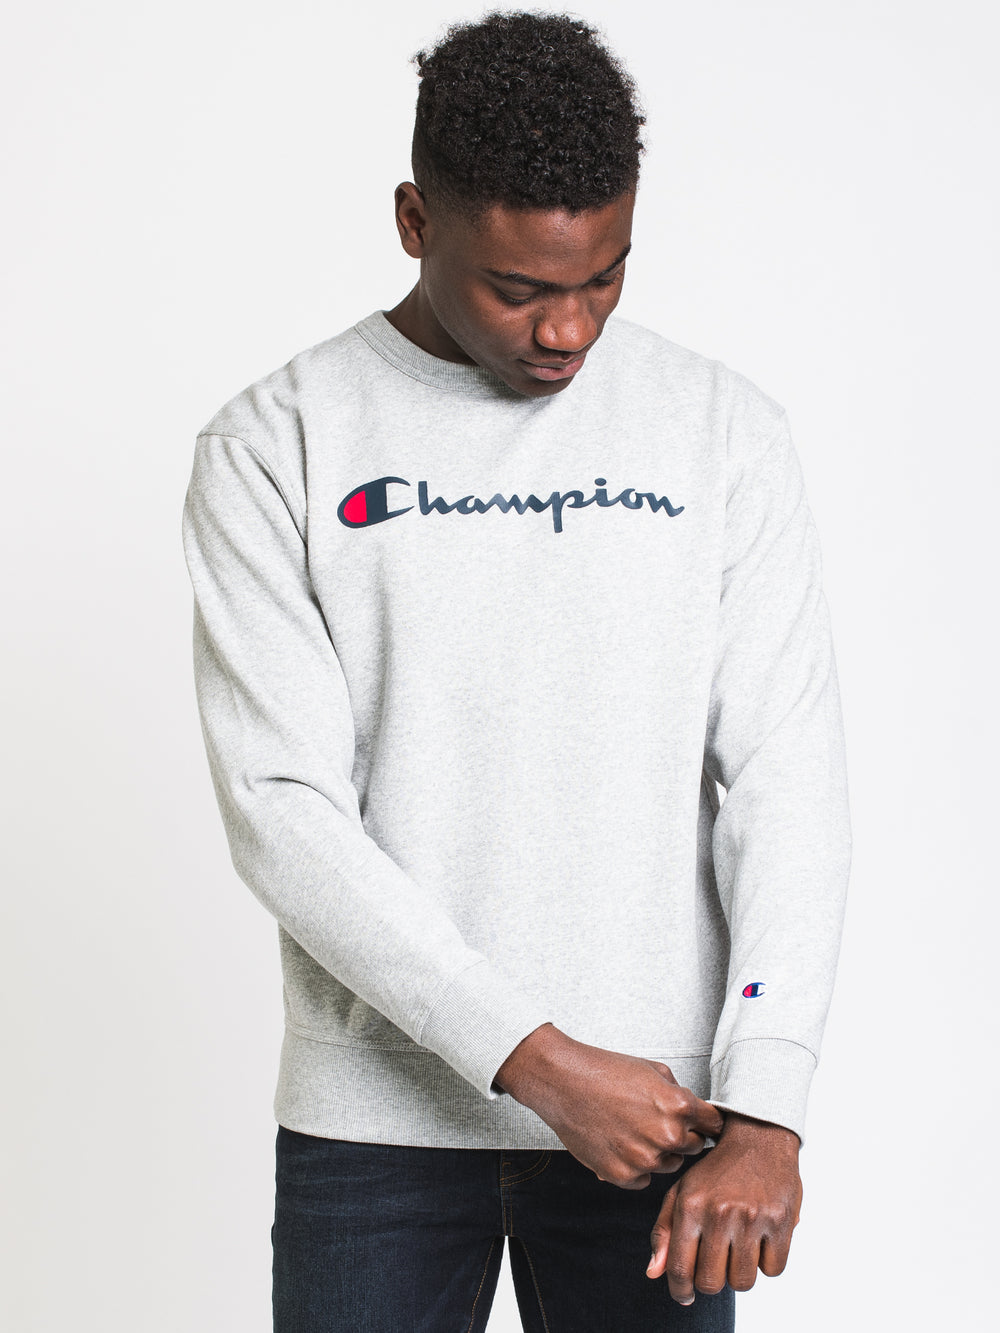 CHAMPION POWERBLEND GRAPHIC CREW SCRIPT  - CLEARANCE